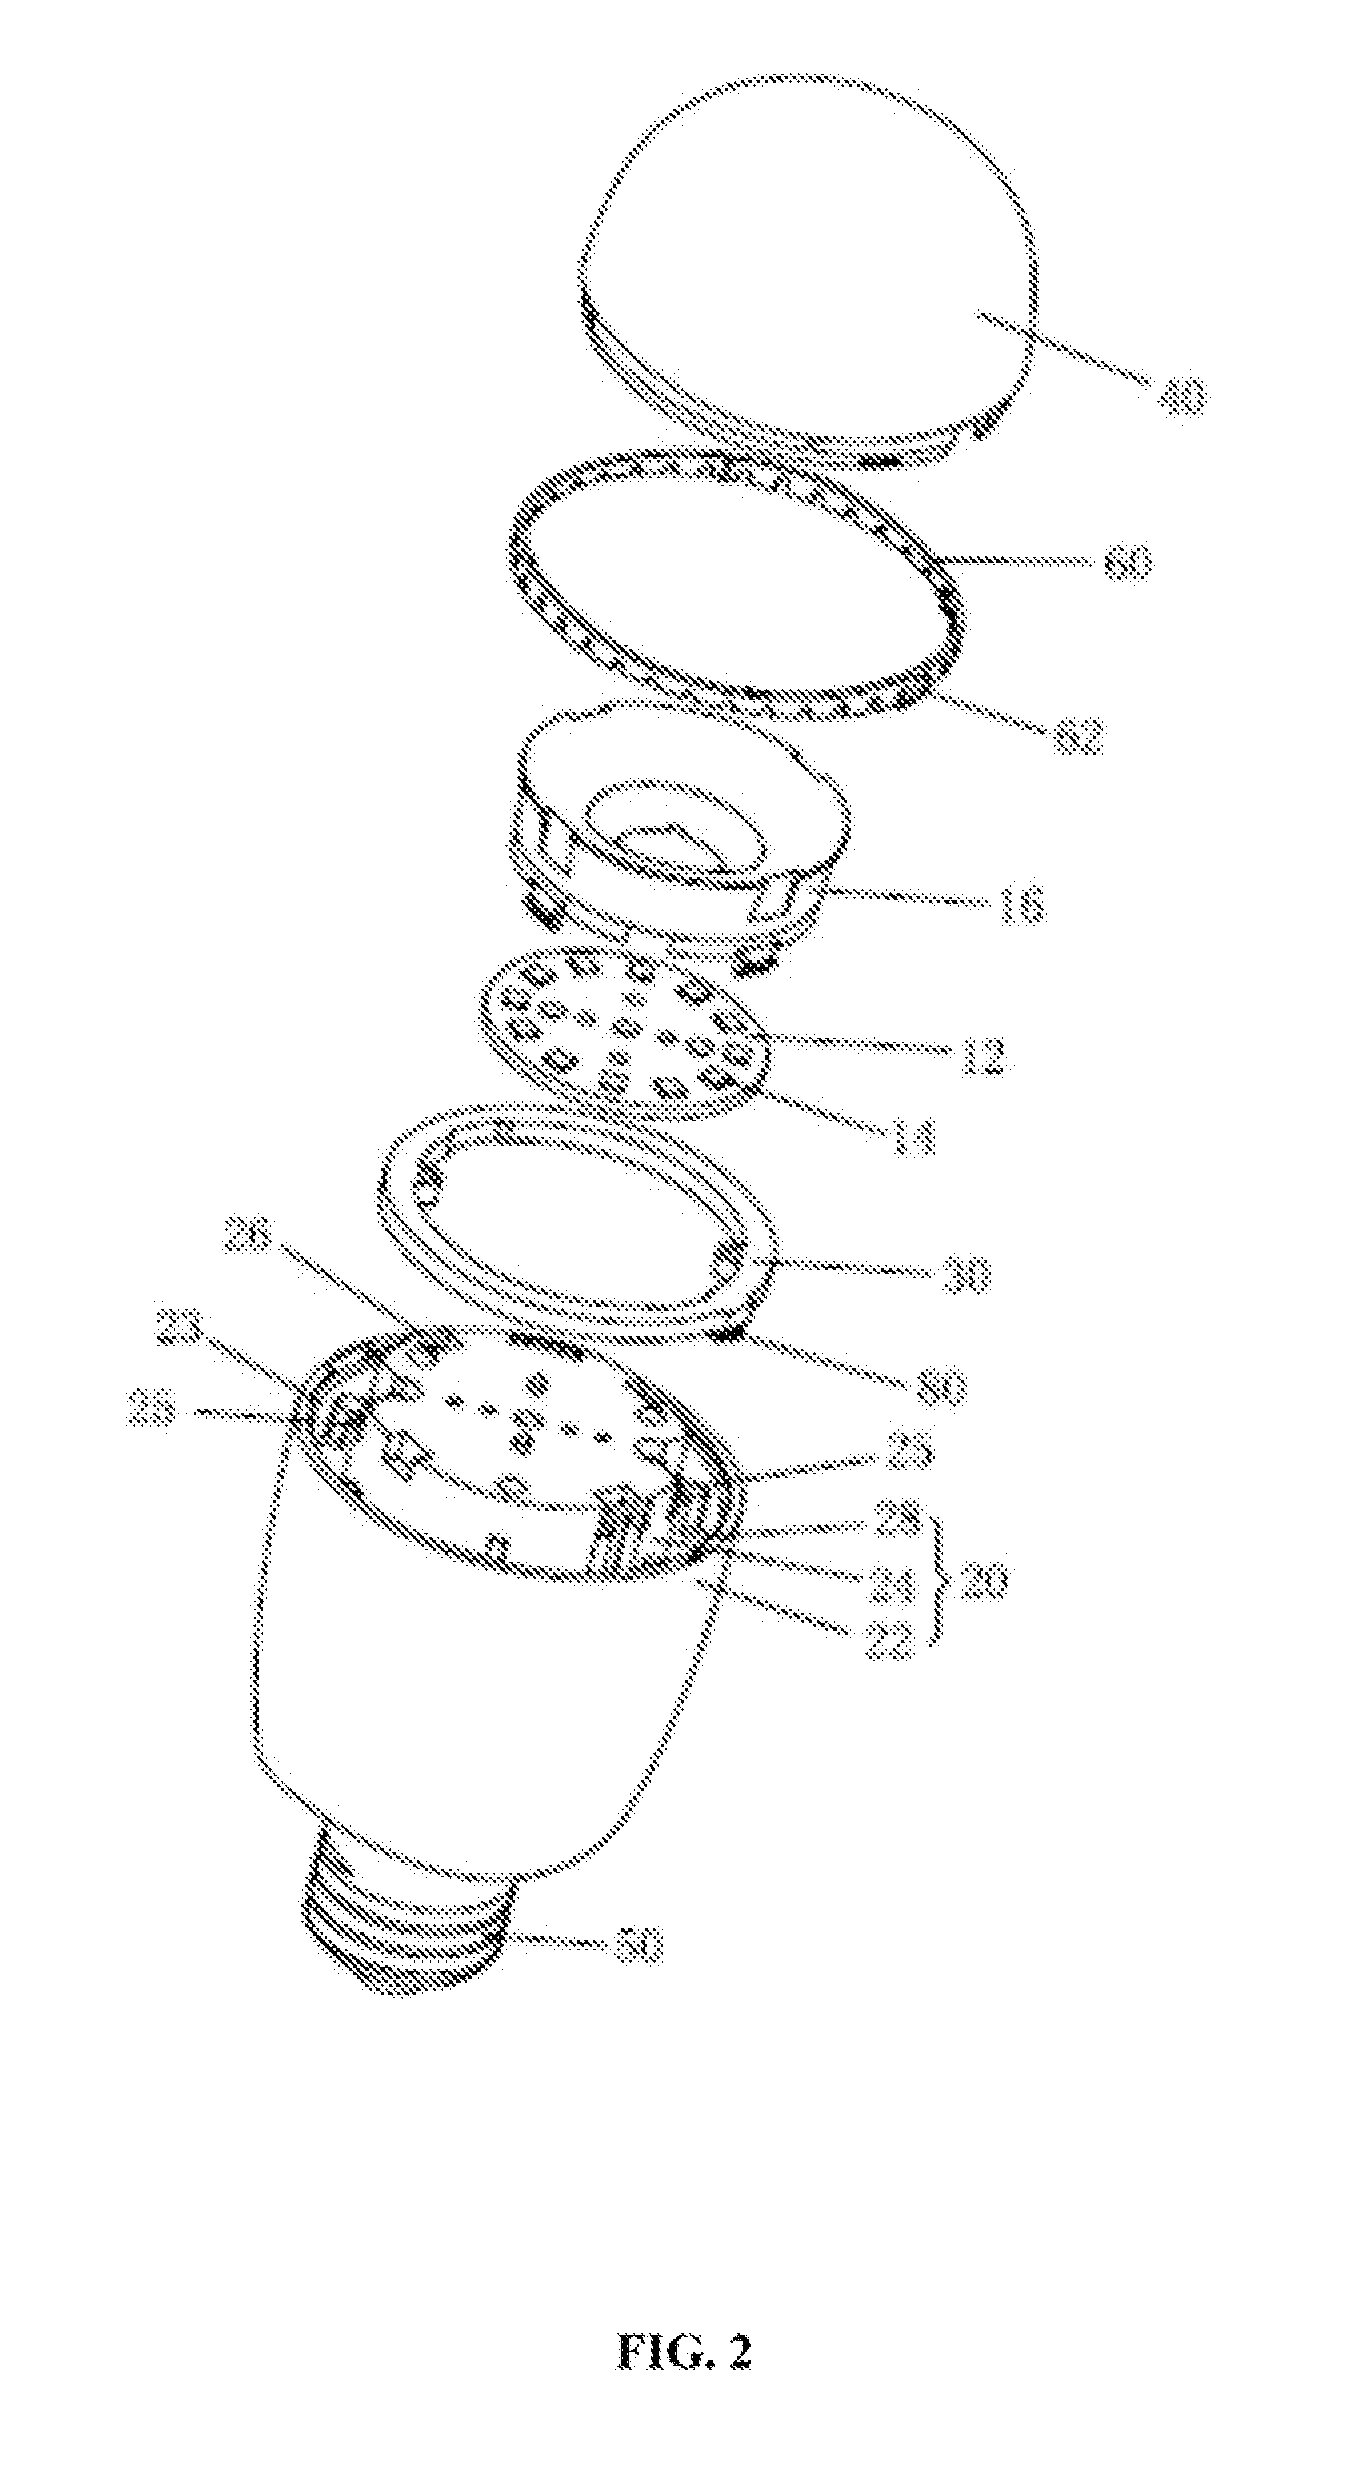 LED lighting device and system, and antenna arrangement method